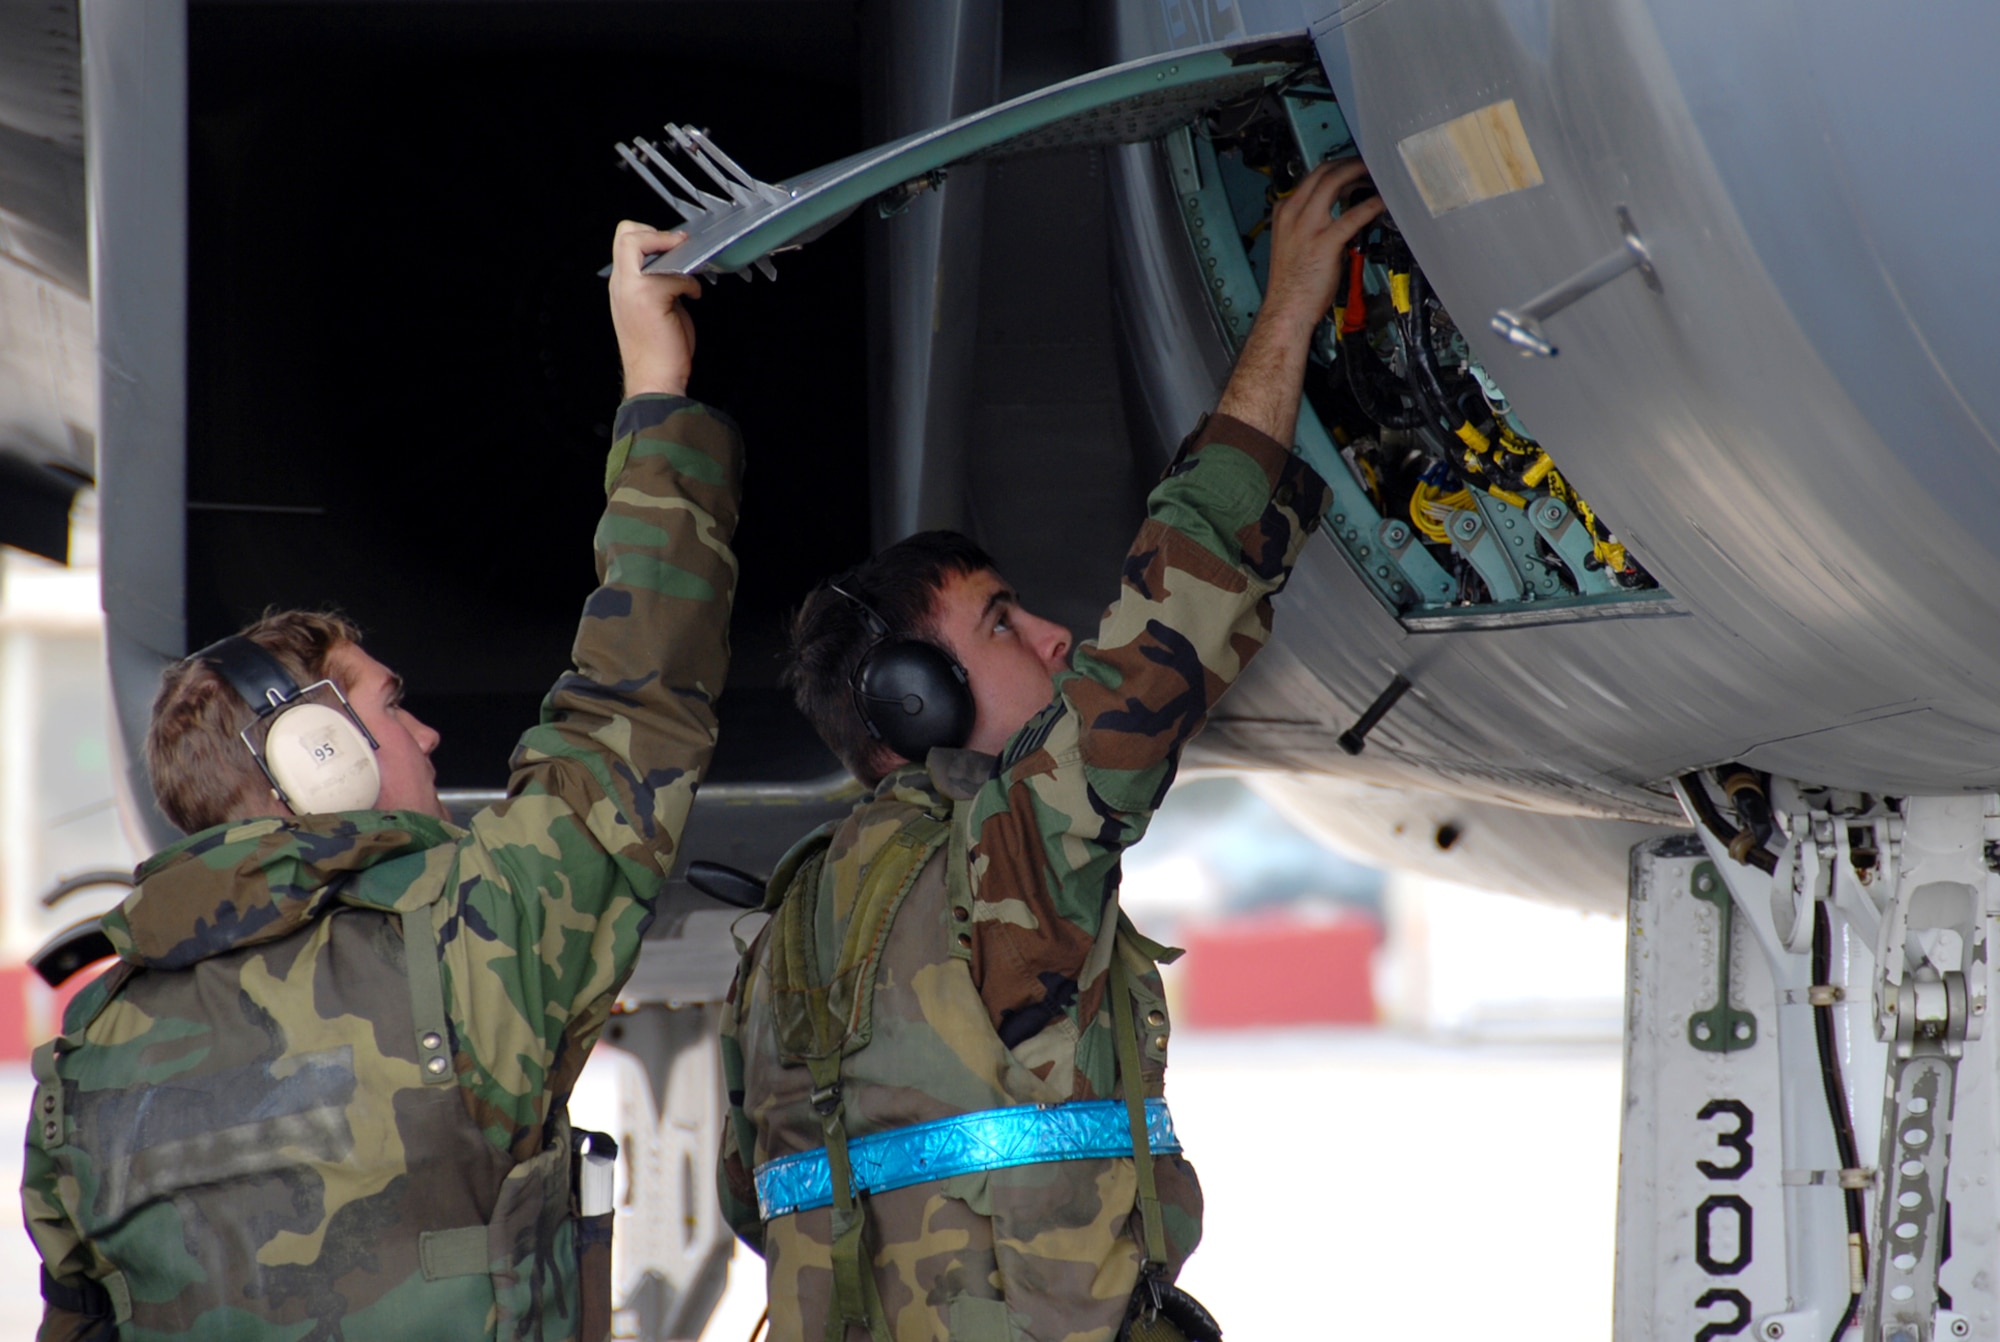 Airmen from the 18th Aircraft Maintenance Squadron perform pre-flight checks of an F-15C during Local Operational Readiness Exercise Beverly High 08-3 at Kadena Air Base, Japan, Jan. 9, 2007. The 18th Wing exercise from Jan. 7 to 11 tests the wing's ability to respond in contingency situations. (U.S. Air Force photo/Tech. Sgt. Anthony Iusi)